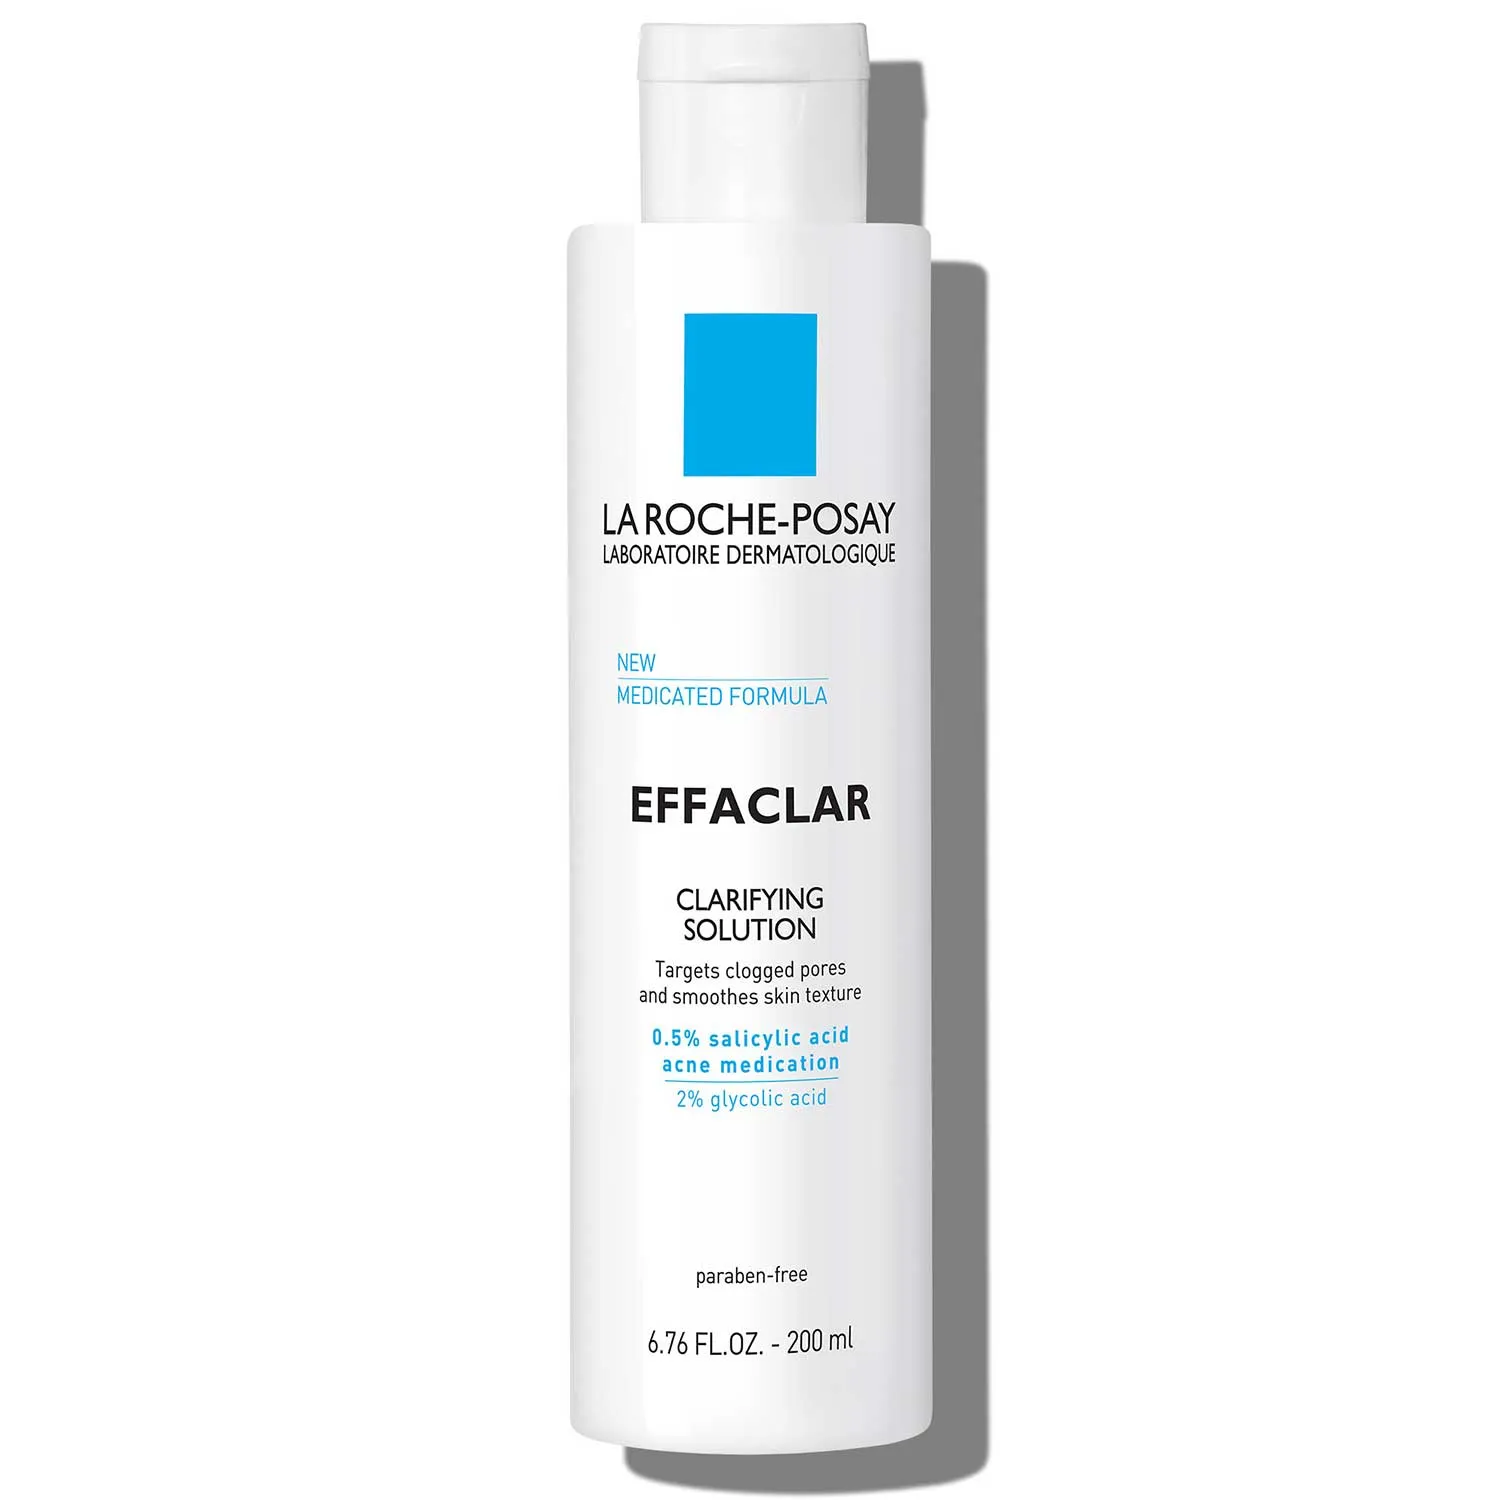 Effaclar Clarifying Solution by La Roche Posay, one of the best La Roche Posay products.